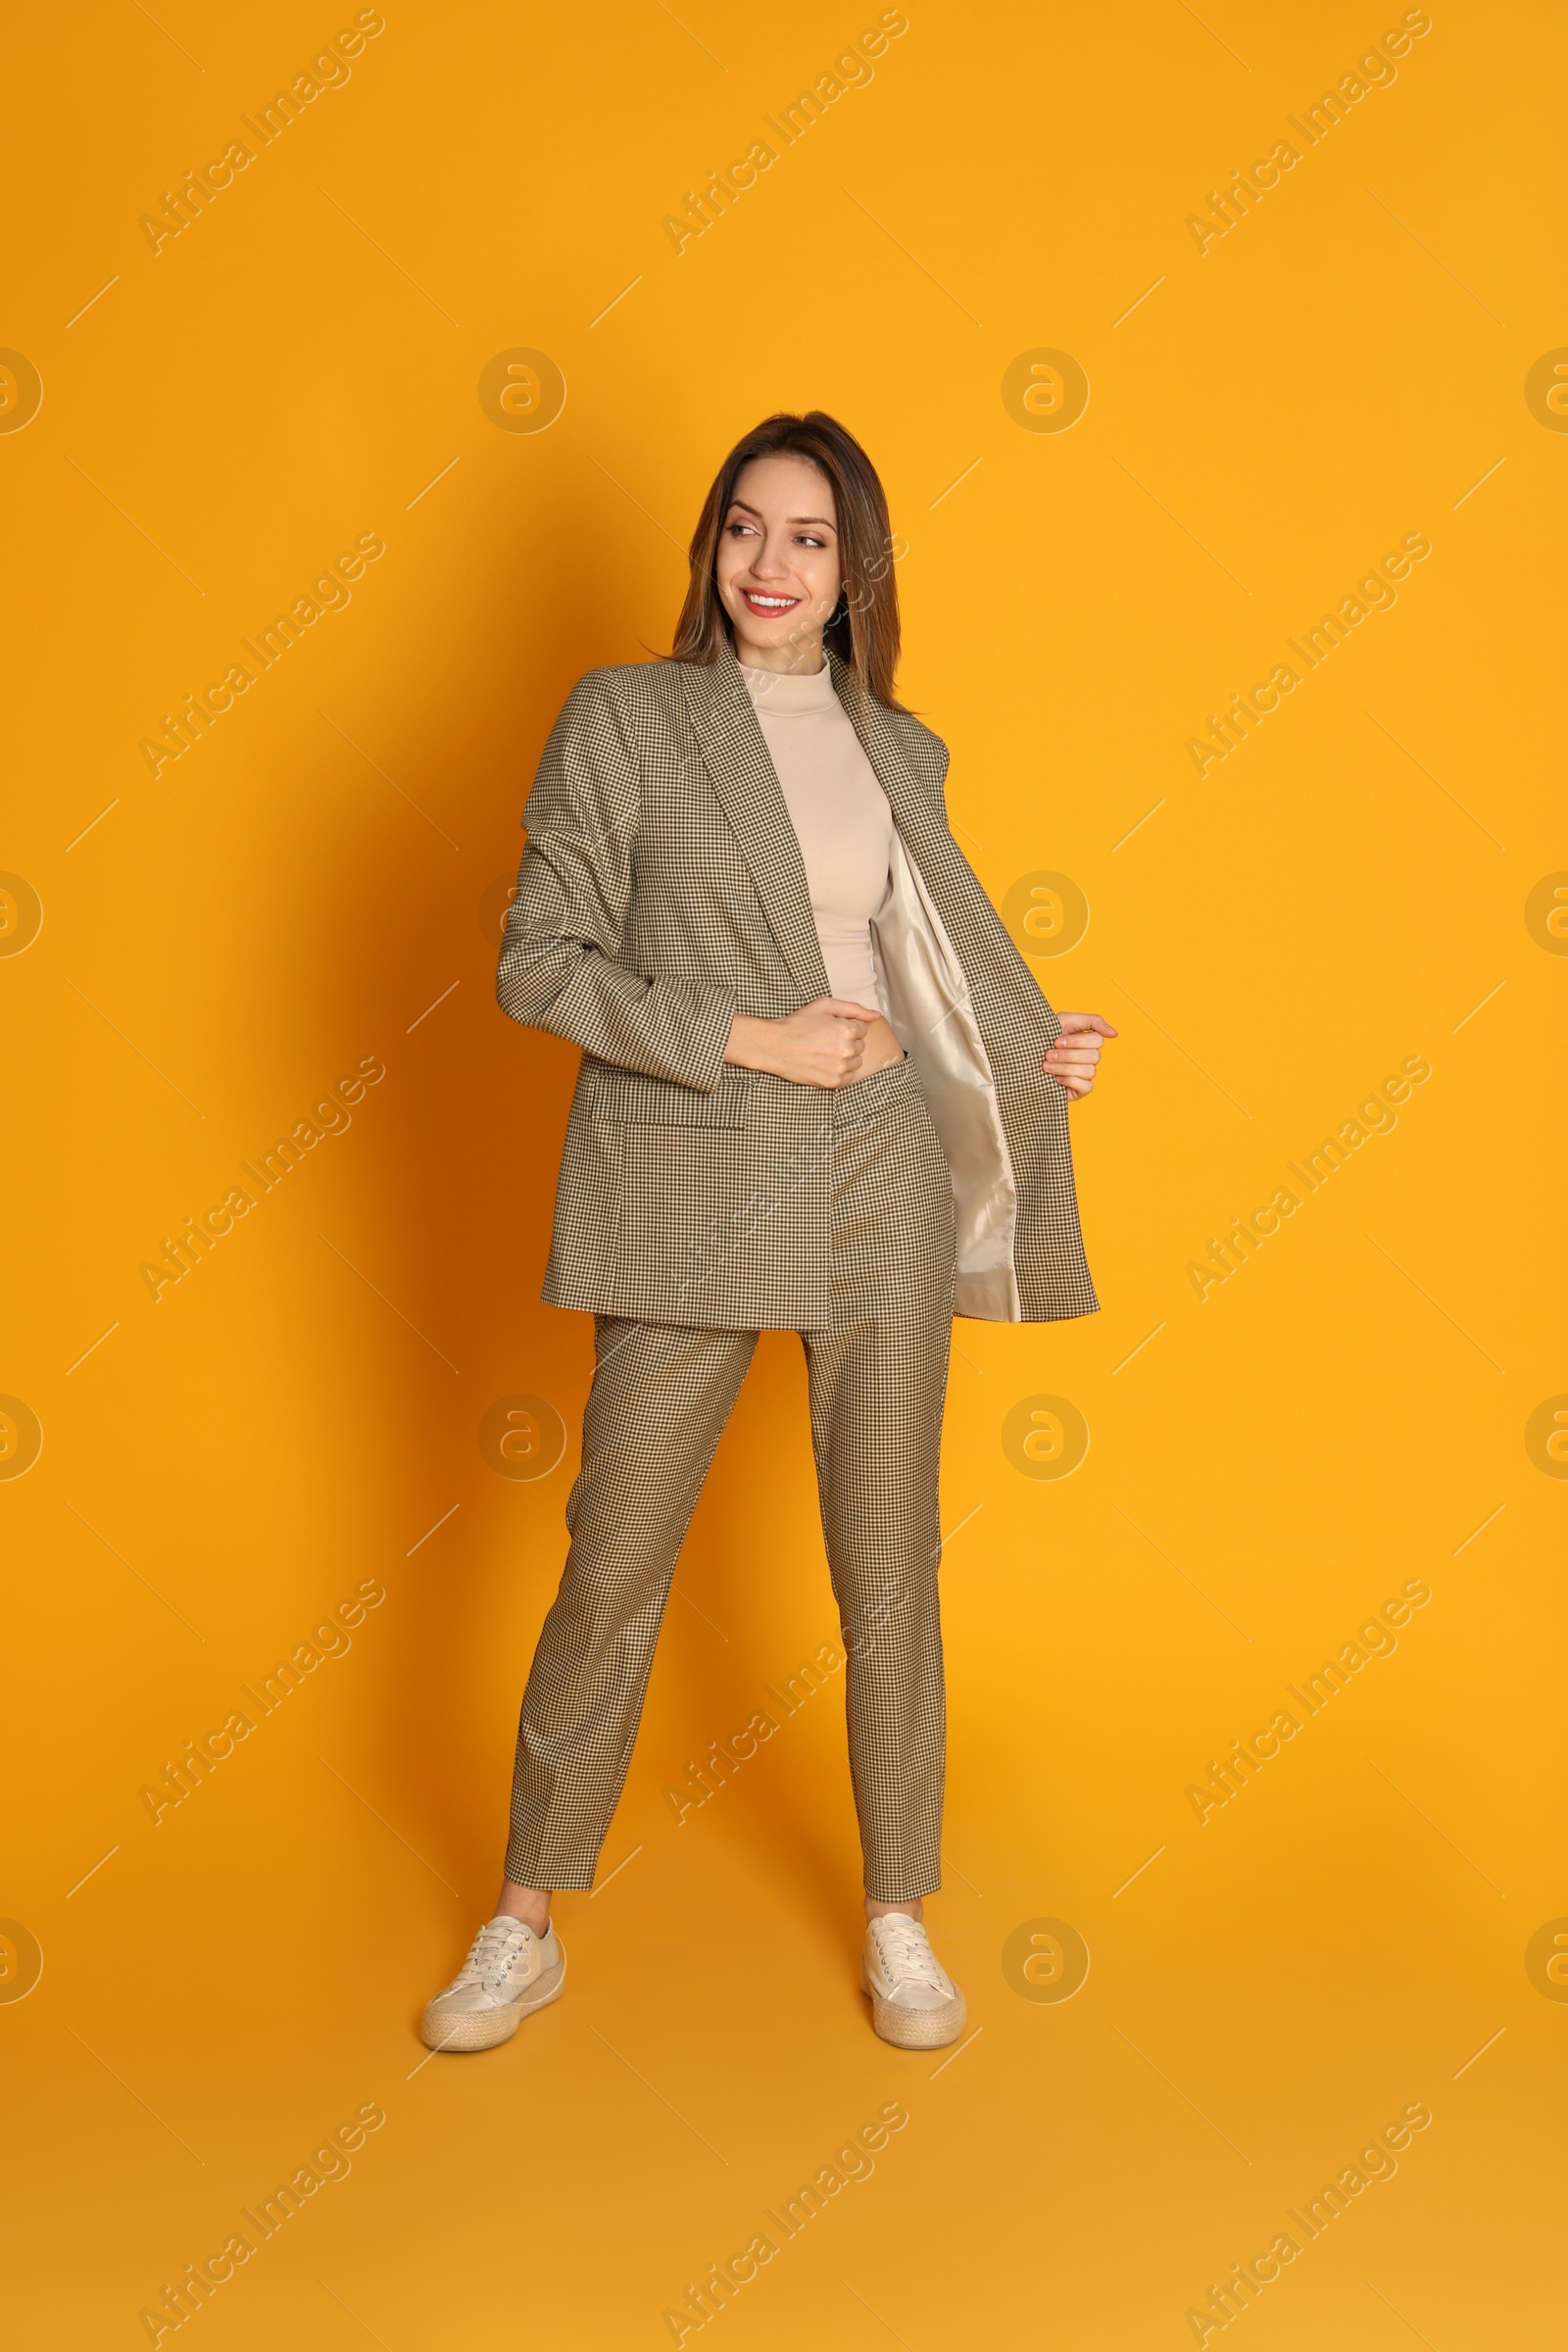 Photo of Full length portrait of beautiful young woman in fashionable suit on yellow background. Business attire